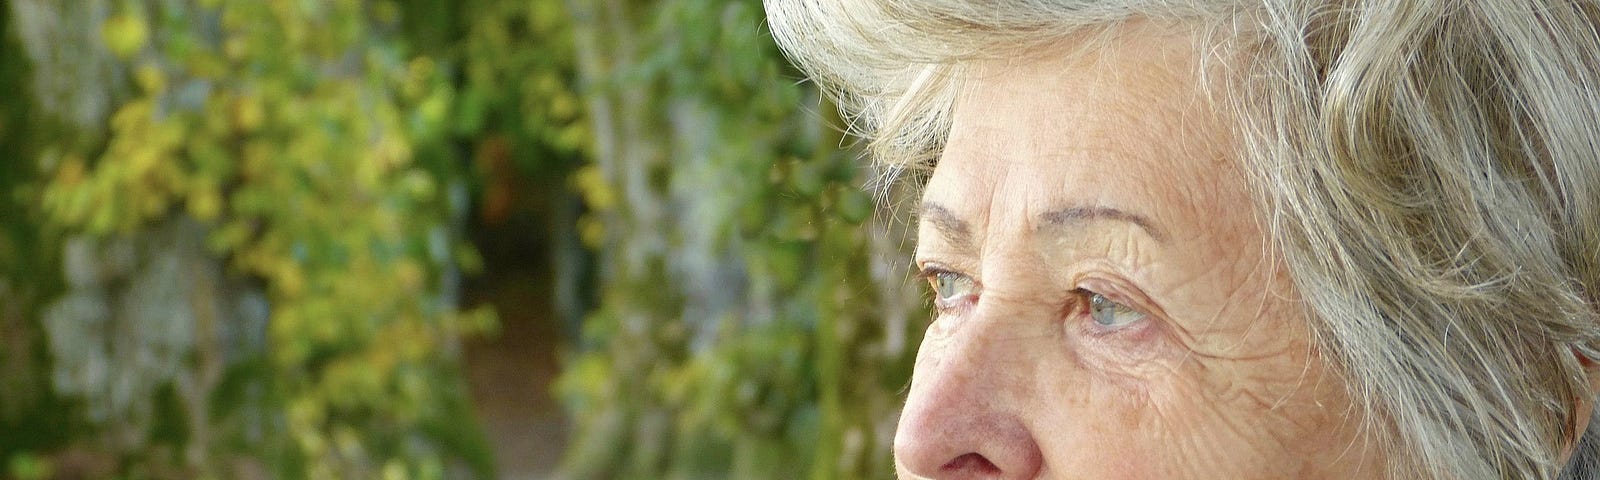 Older woman with gray hair